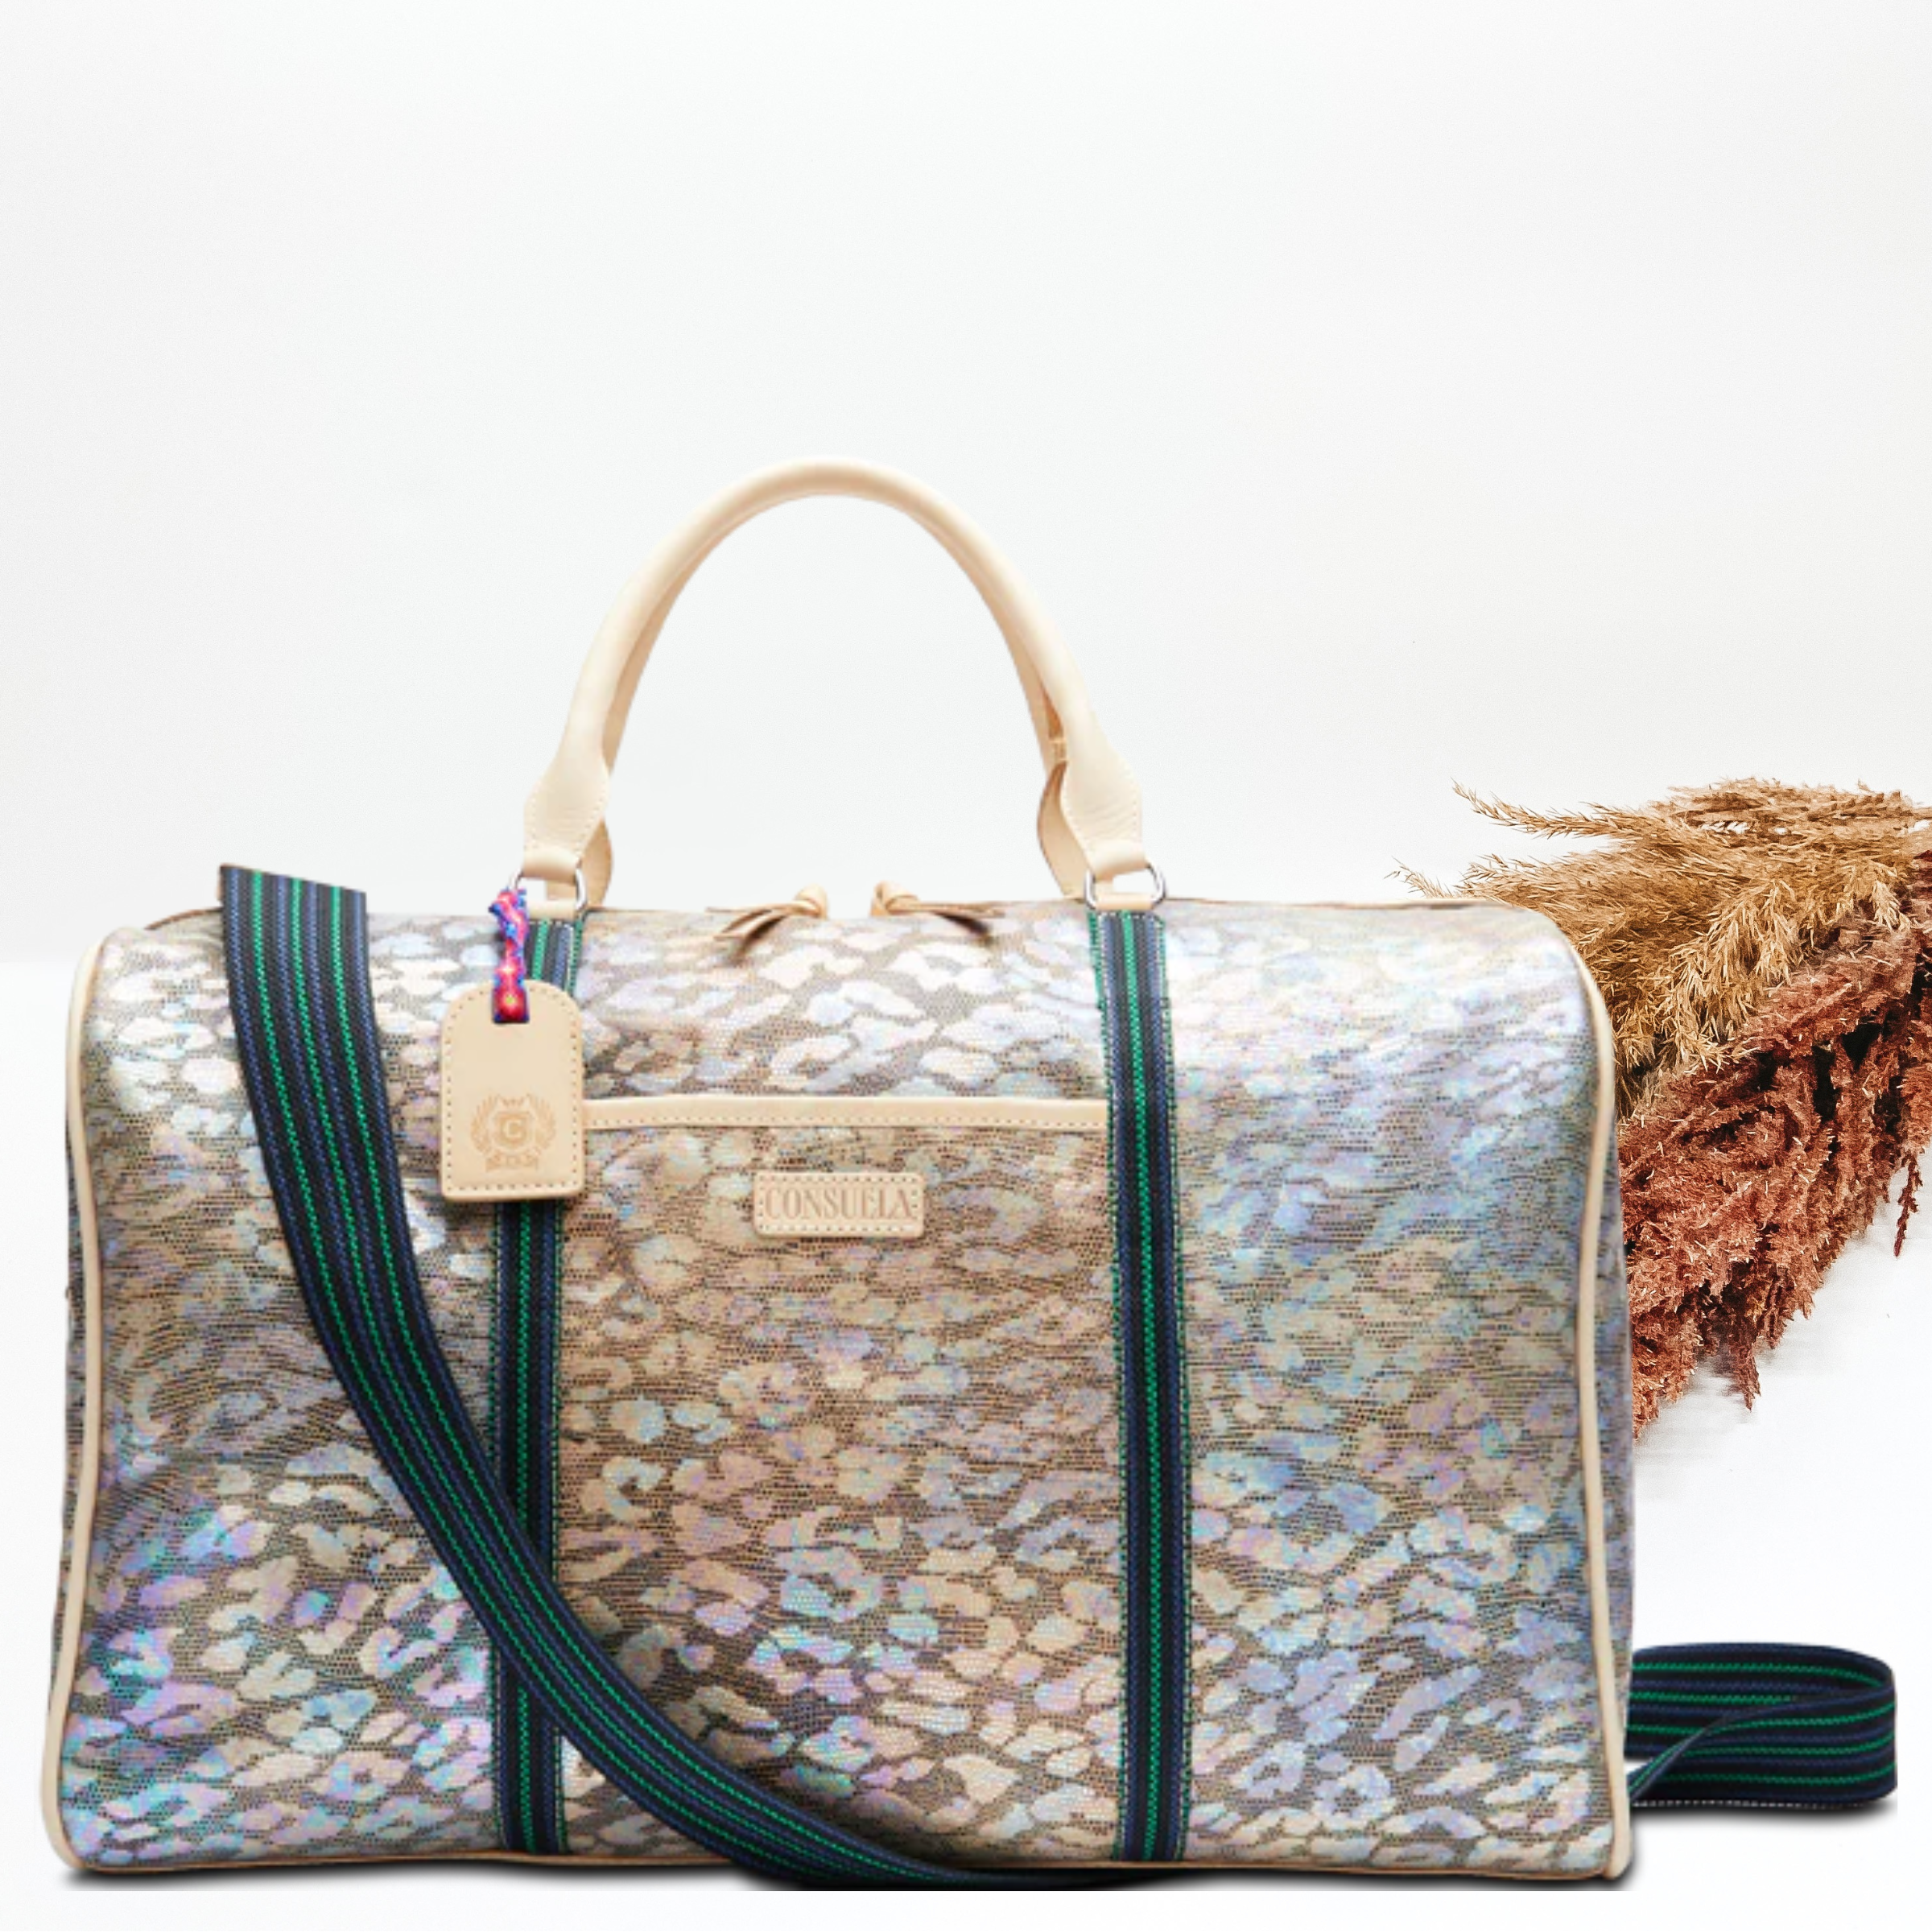 Pictured is a duffle bag with iridescent, multicolor leopard print design. This duffle bag includes short, light tan handles and a long, striped strap. This bag is pictured on a white background with pompous grass on the left side of the picture. 